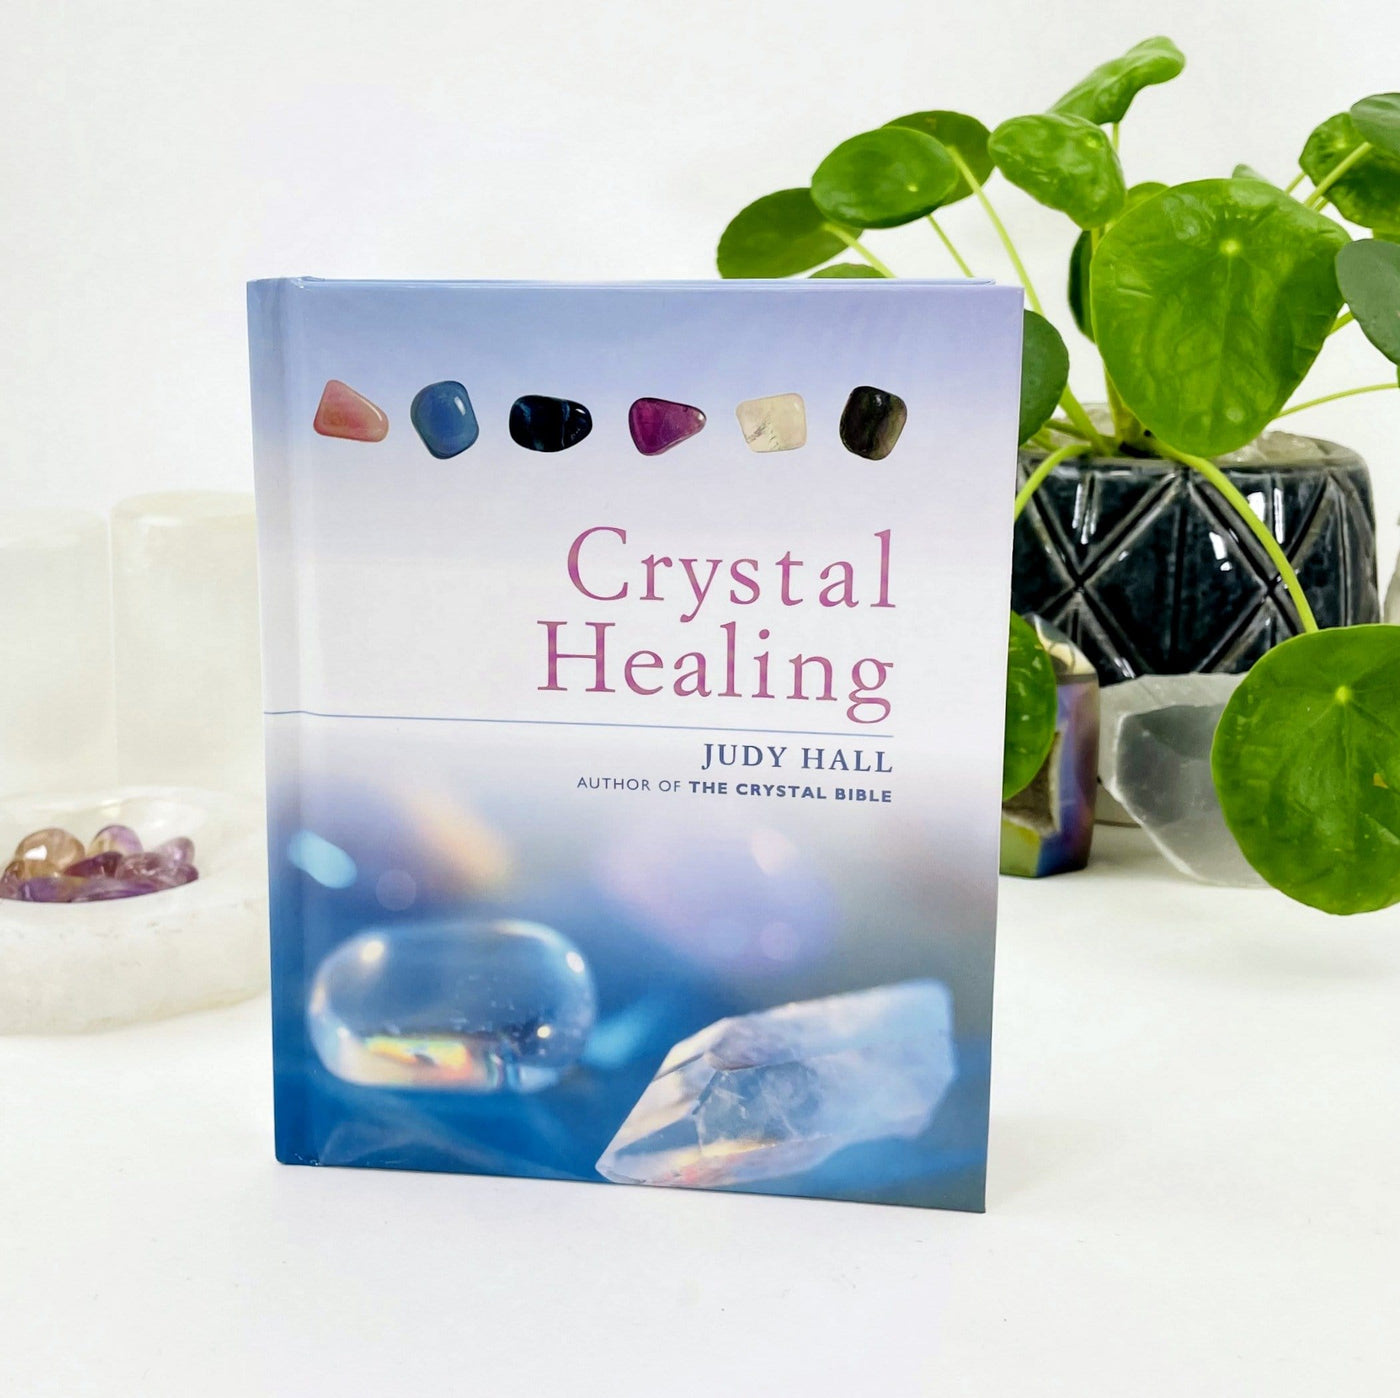 Crystal Healing by Judy Hall with decorations in the background